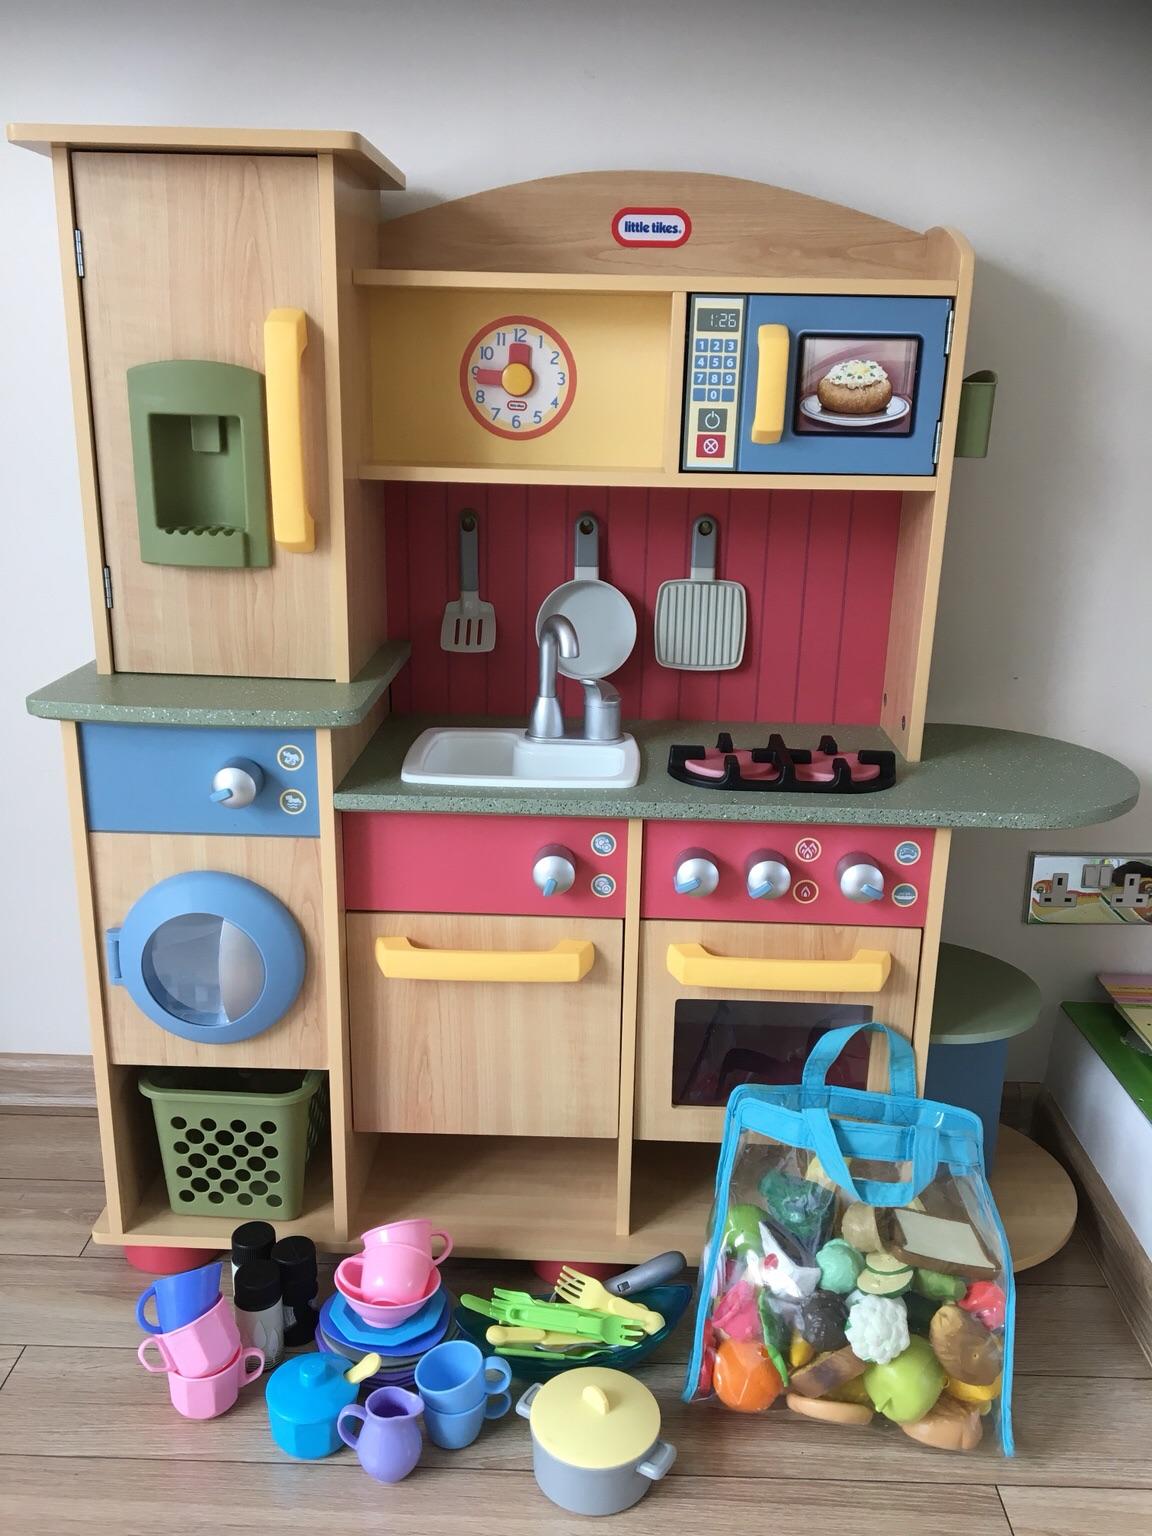 Little Tikes Wooden Kitchen In Ss15 Basildon For 65 00 For Sale Shpock